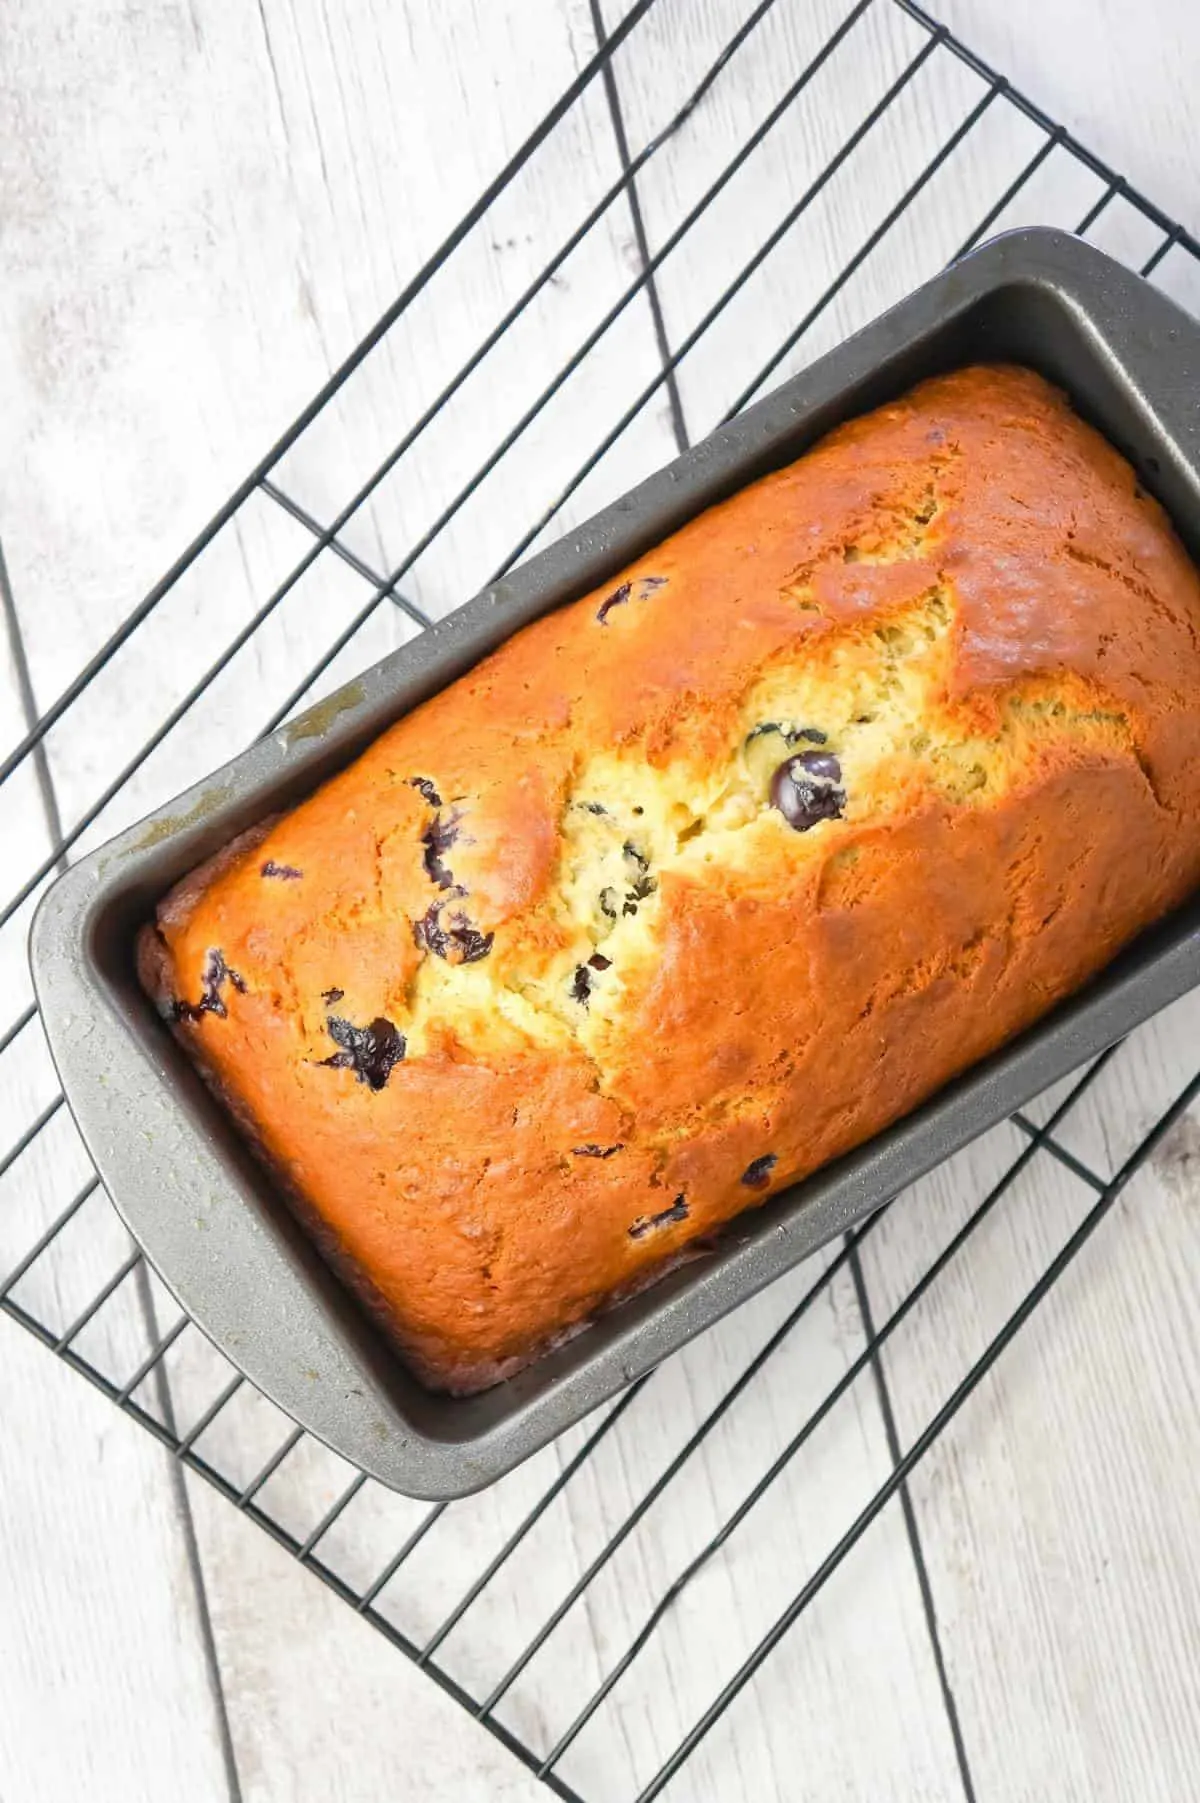 Blueberry Banana Bread is a tasty treat made with ripe bananas and loaded with fresh blueberries.